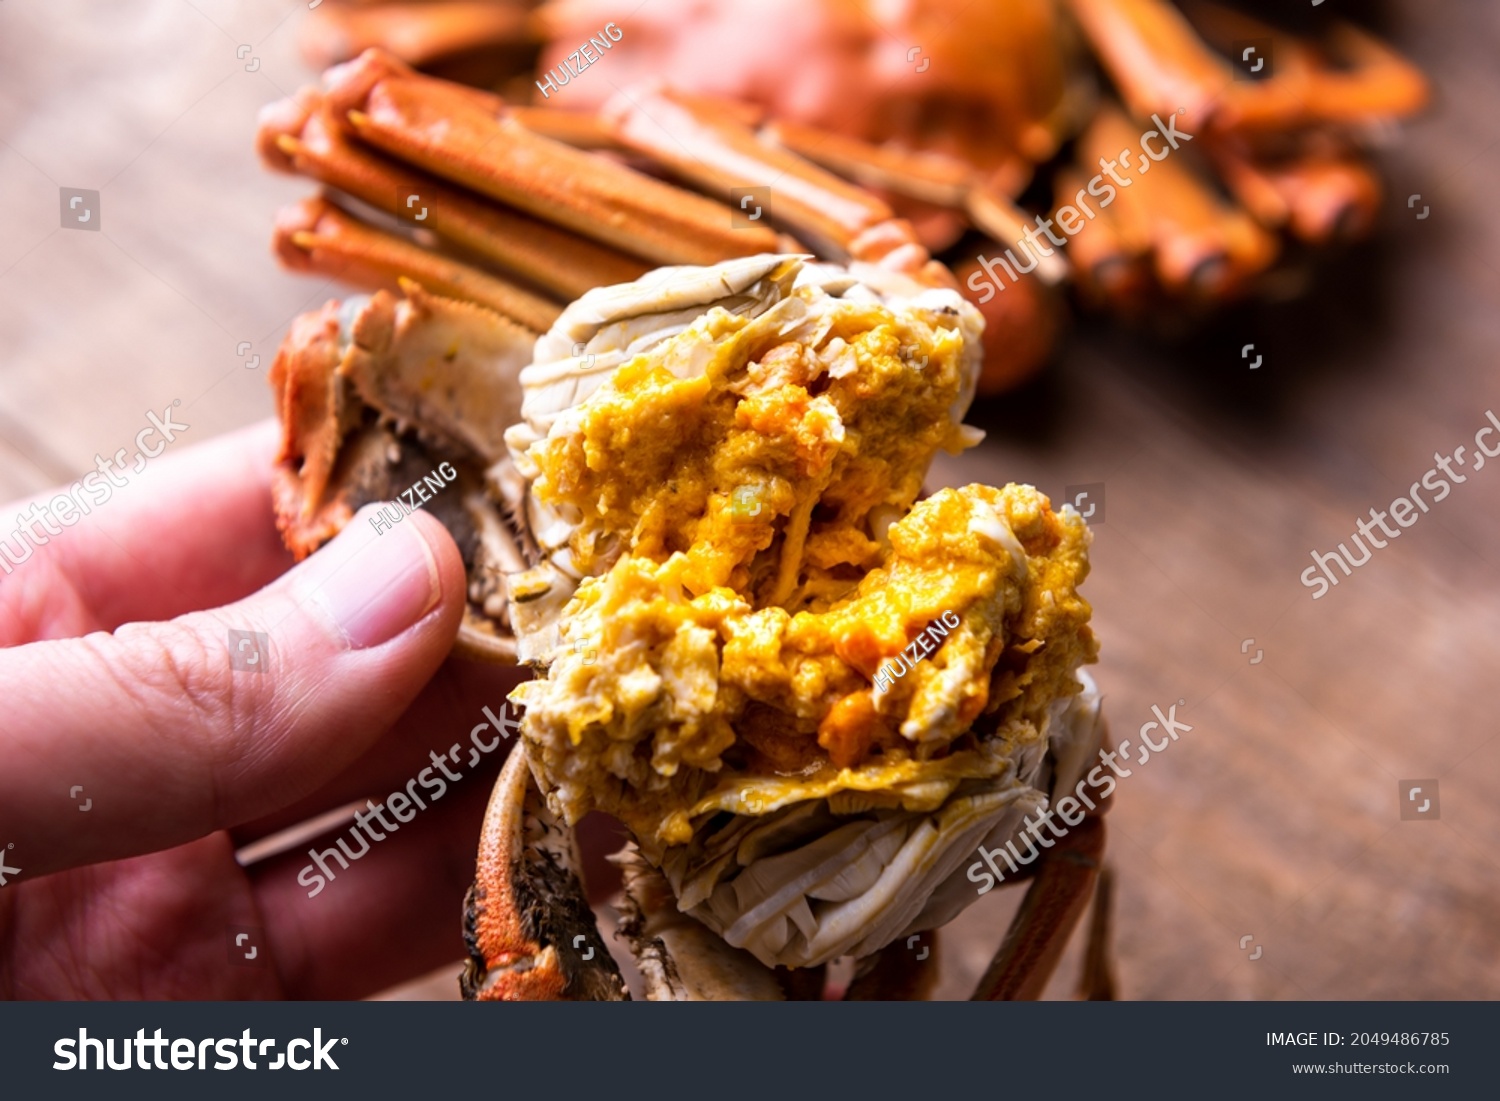 Cooked hairy crabs on the table, Closeup. The hairy crab and rich crab cream. #2049486785